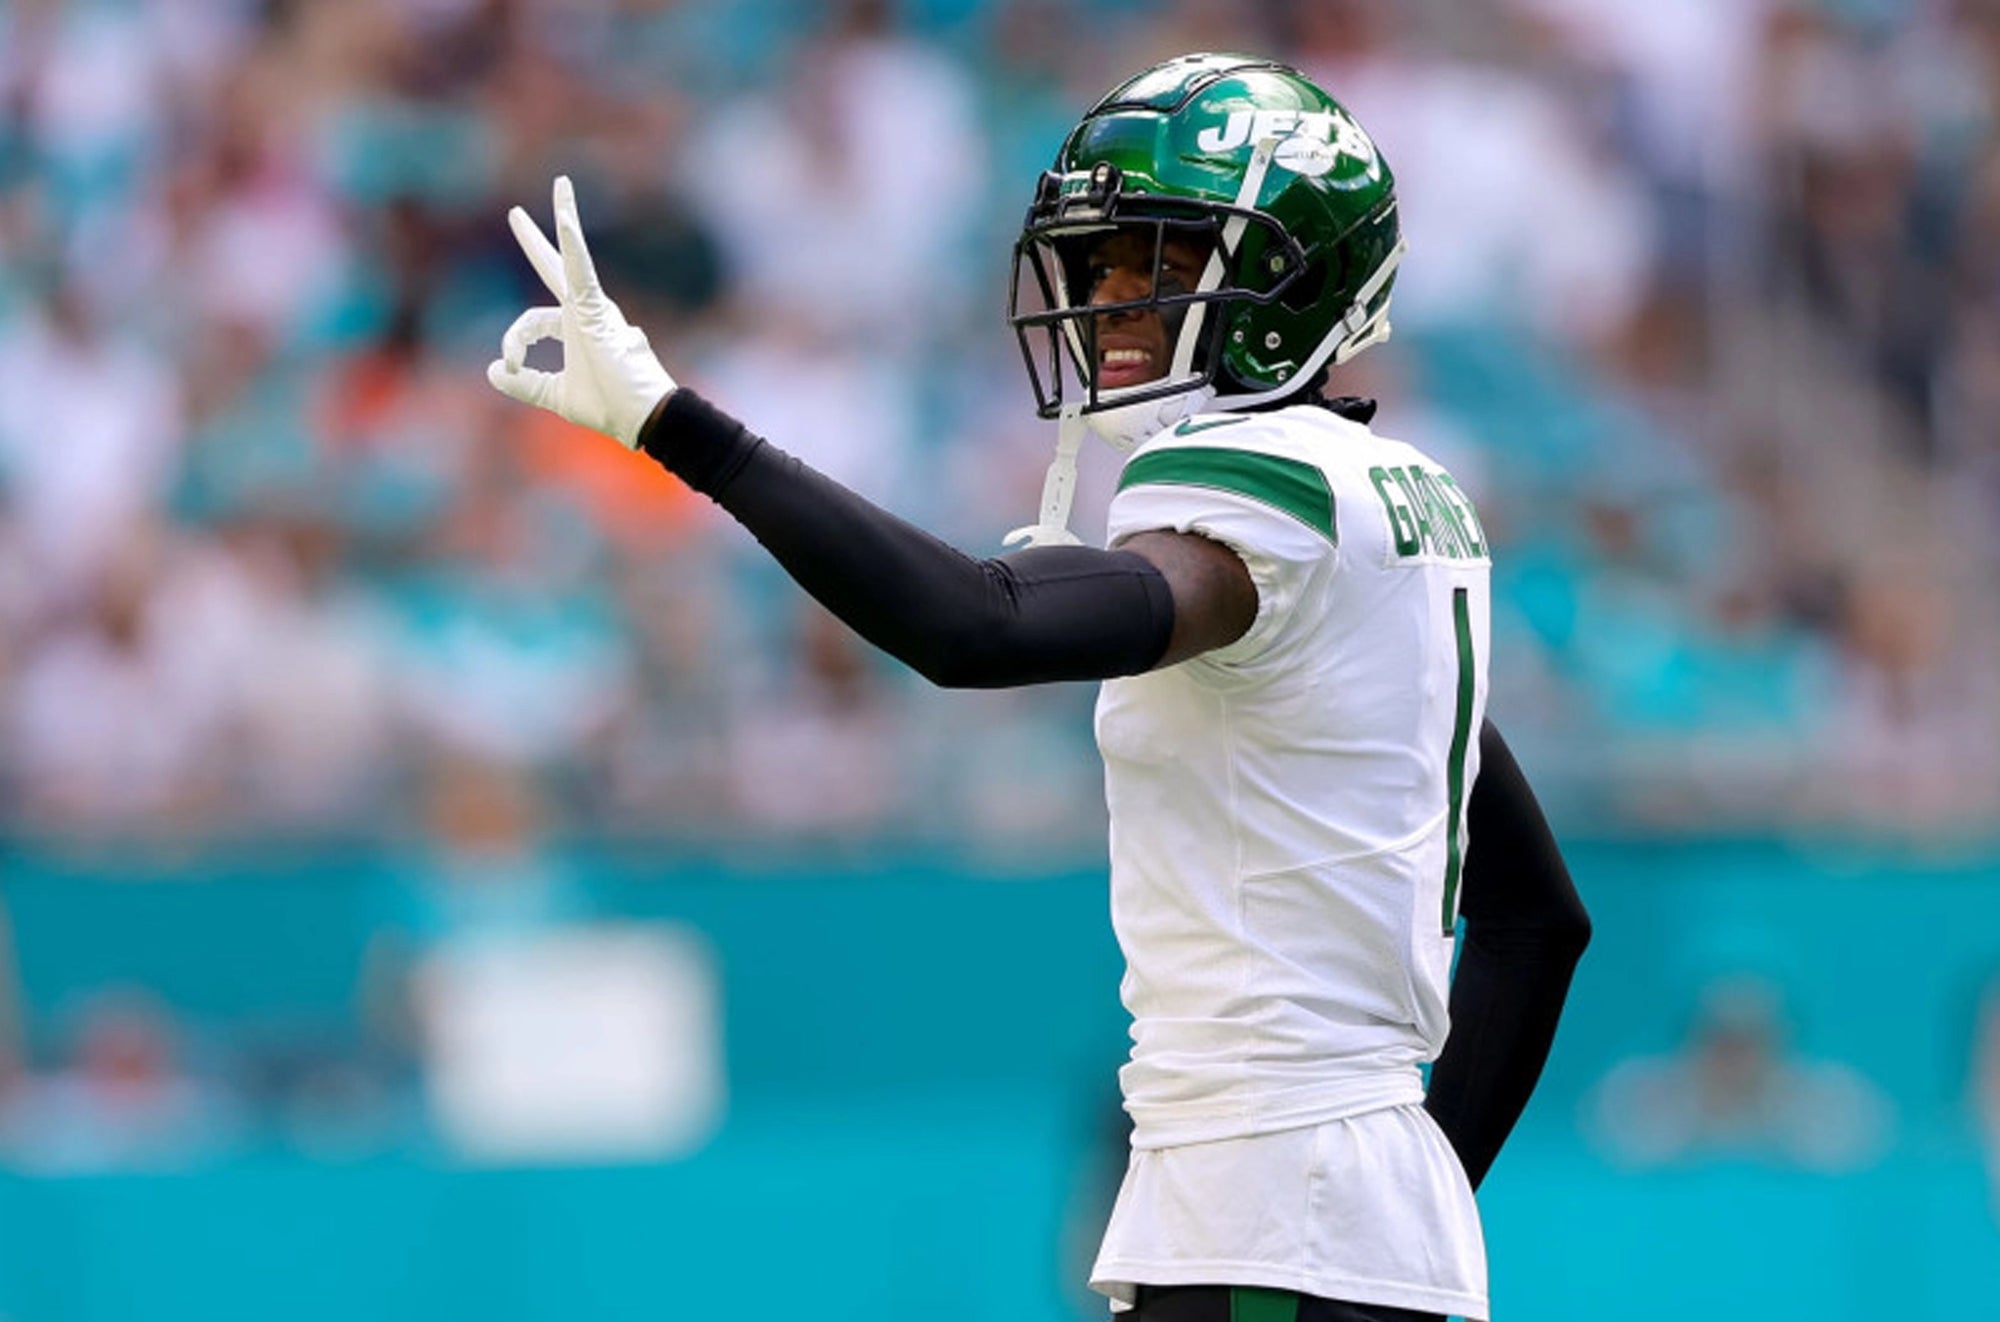 Jets Country 2022 Draft Review: Sauce Gardner Talked the Talk and Walked the Walk